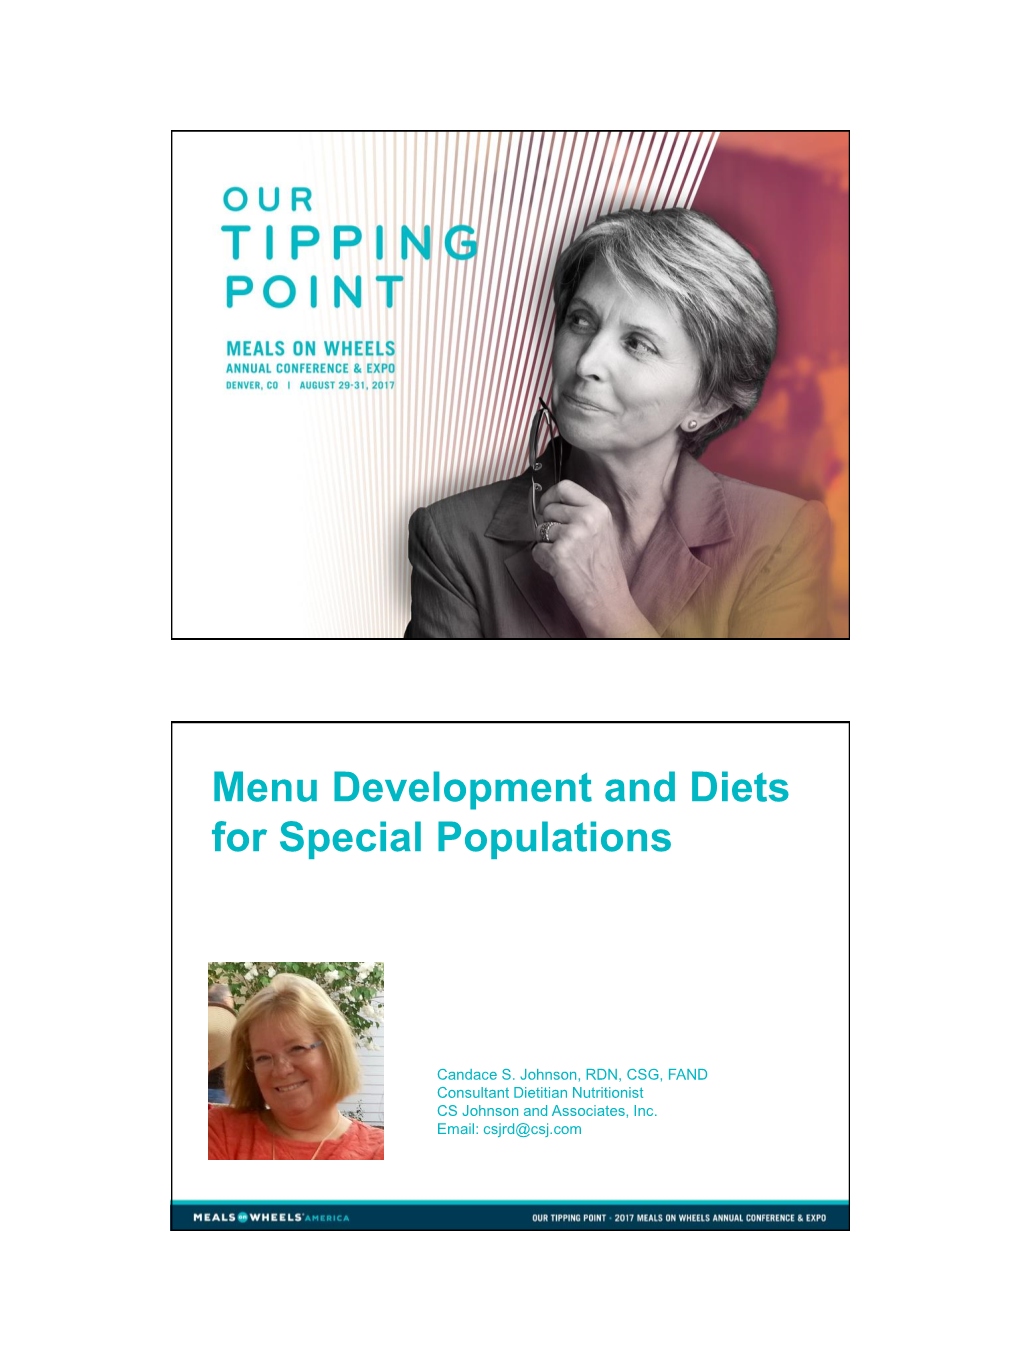 Menu Development and Diets for Special Populations